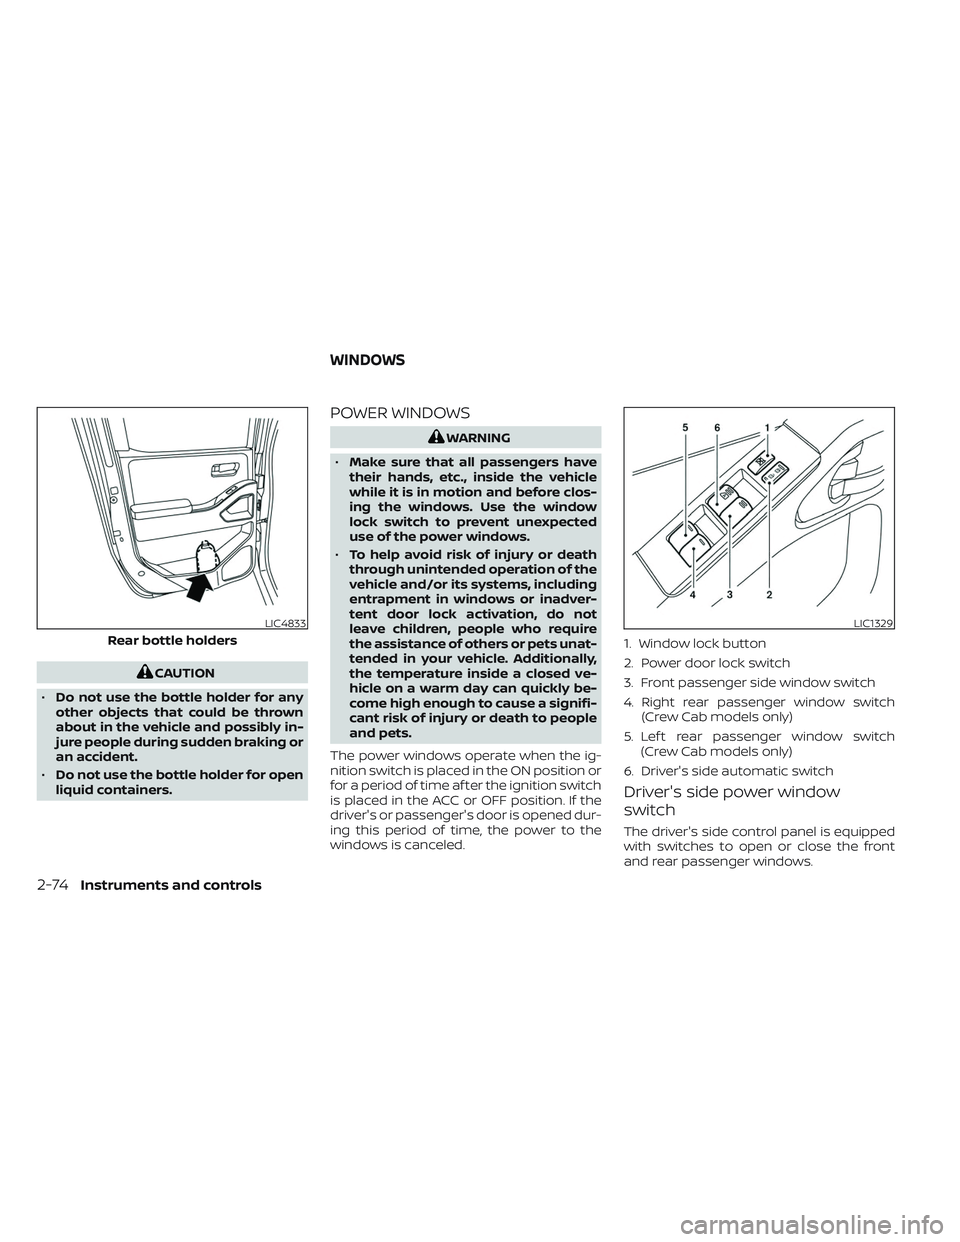 NISSAN FRONTIER 2023  Owners Manual CAUTION
• Do not use the bottle holder for any
other objects that could be thrown
about in the vehicle and possibly in-
jure people during sudden braking or
an accident.
• Do not use the bottle ho